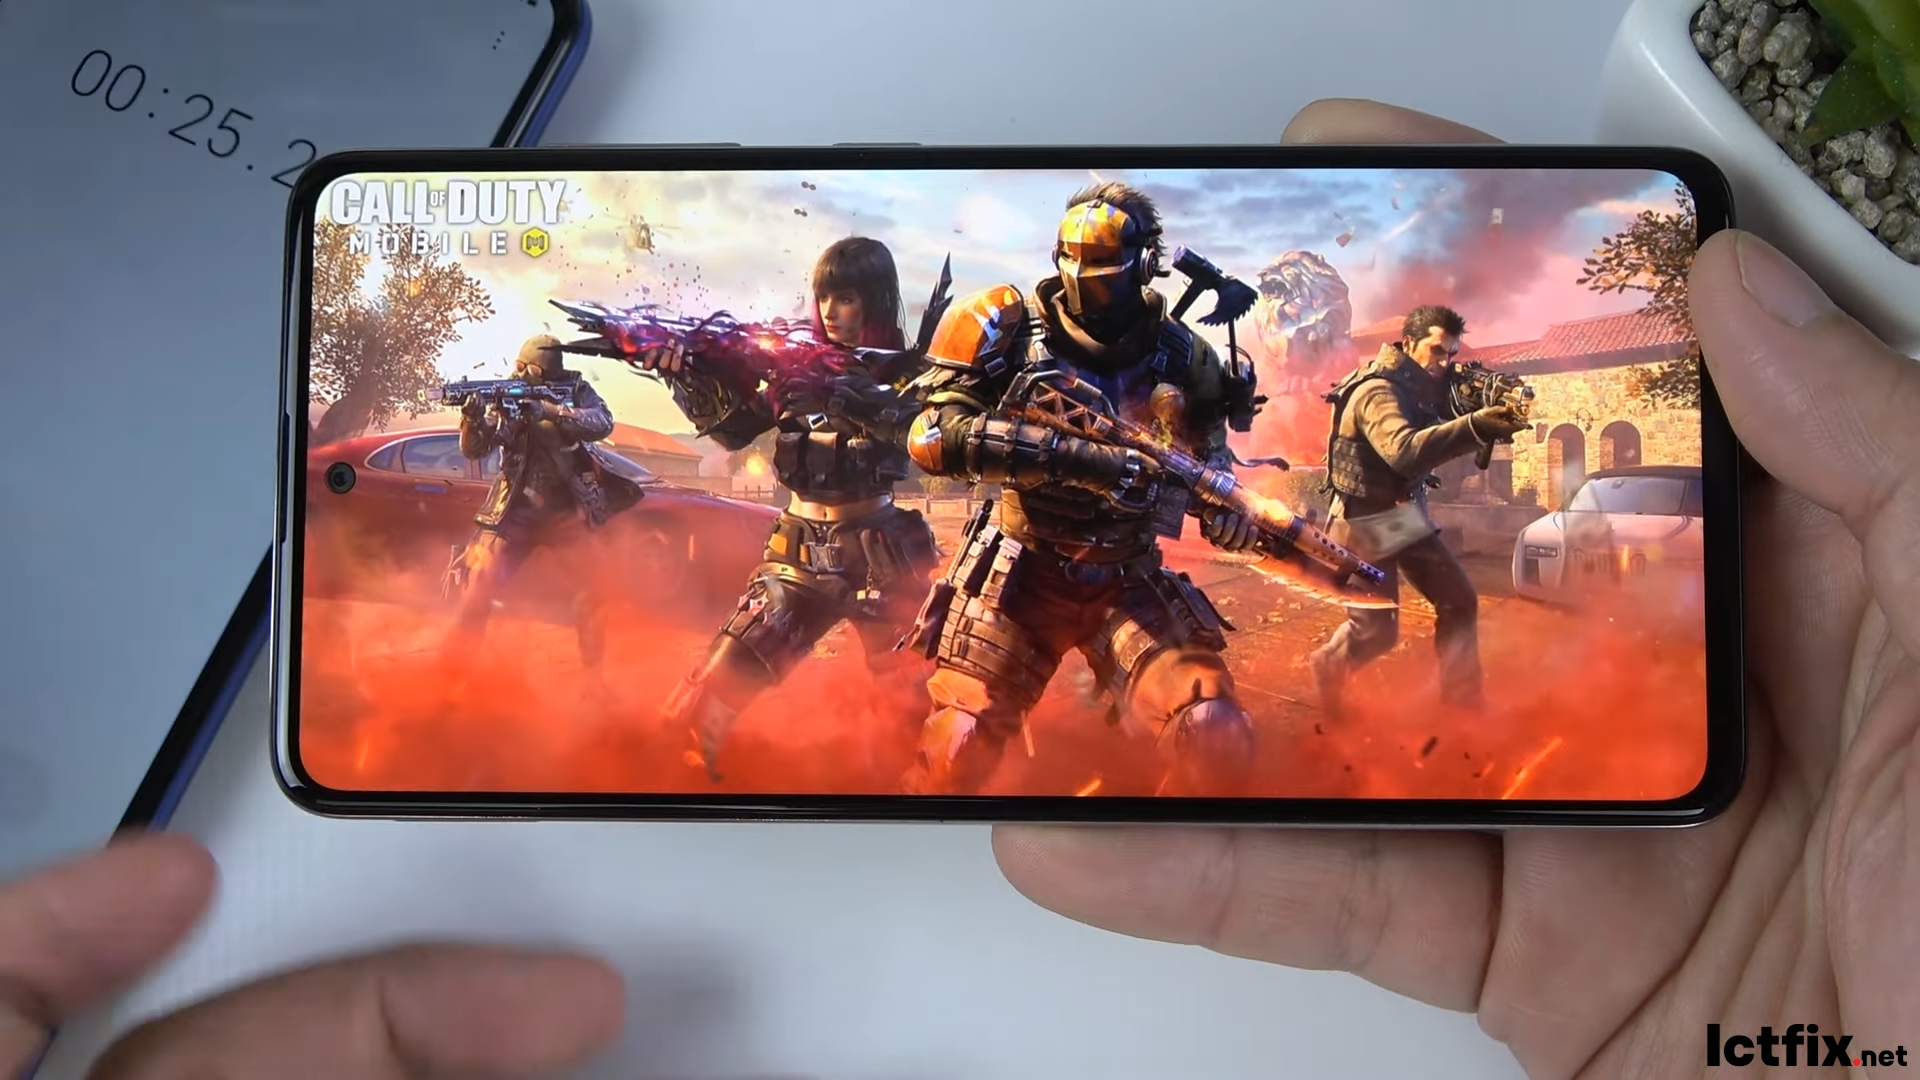 Samsung Galaxy A51 Call of Duty Gaming test New Update 2022 - ICTfix